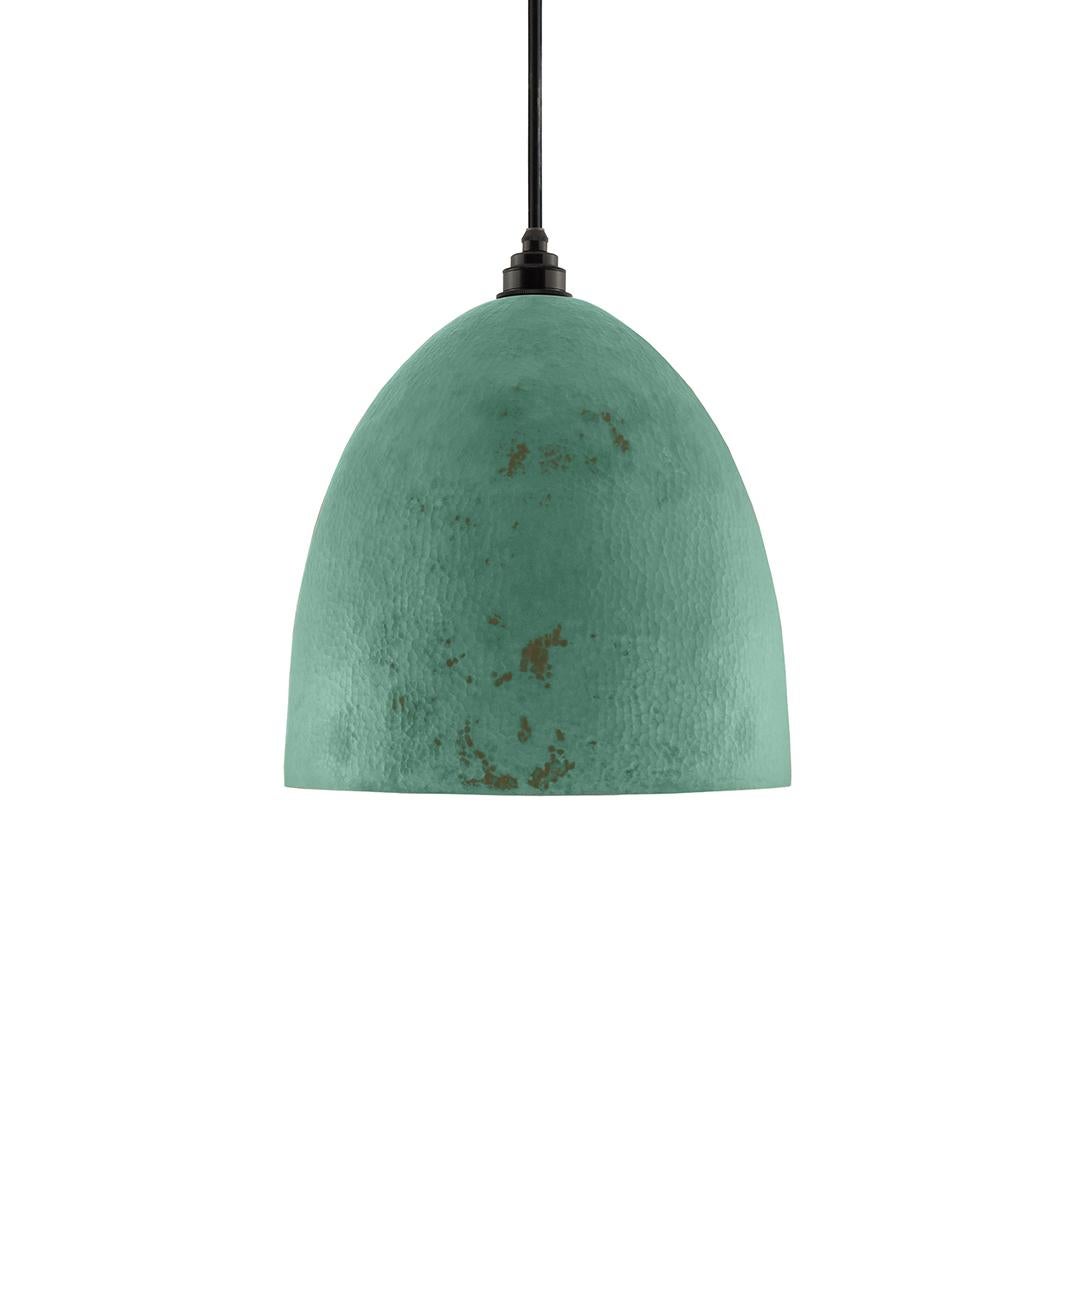 Belle Contemporary Pendant Lamp in Solid Polished Copper In New Condition For Sale In San Miguel de Allende, MX